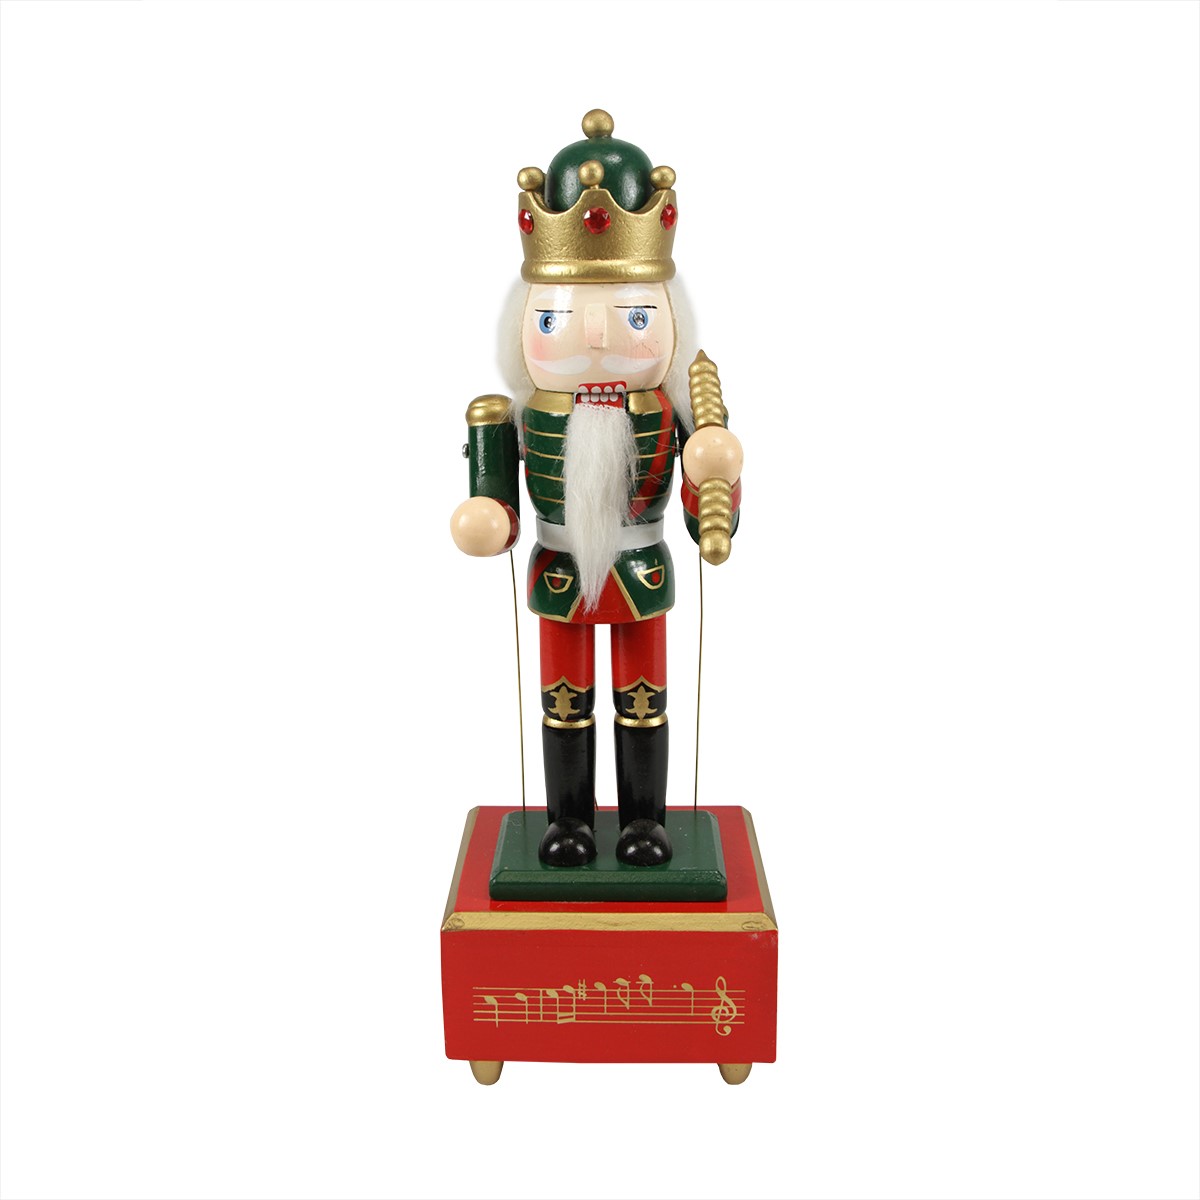 Nutcracker Factory 12" Red and Green Animated King with Scepter Christmas Nutcracker